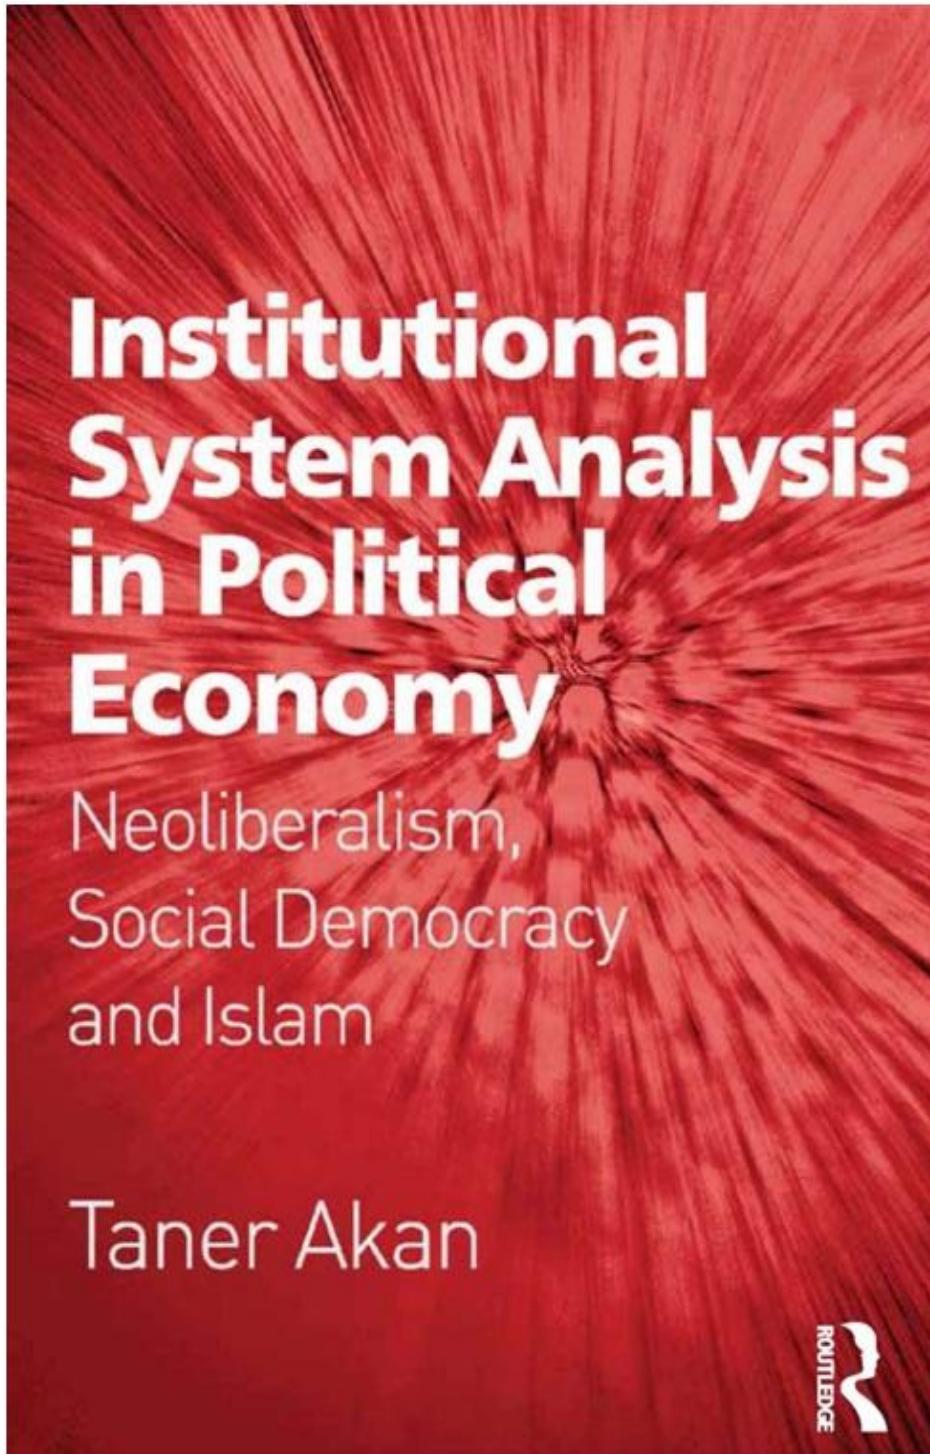 Institutional System Analysis in Political Economy Neoliberrlism, Social Democracy and Islam,2015